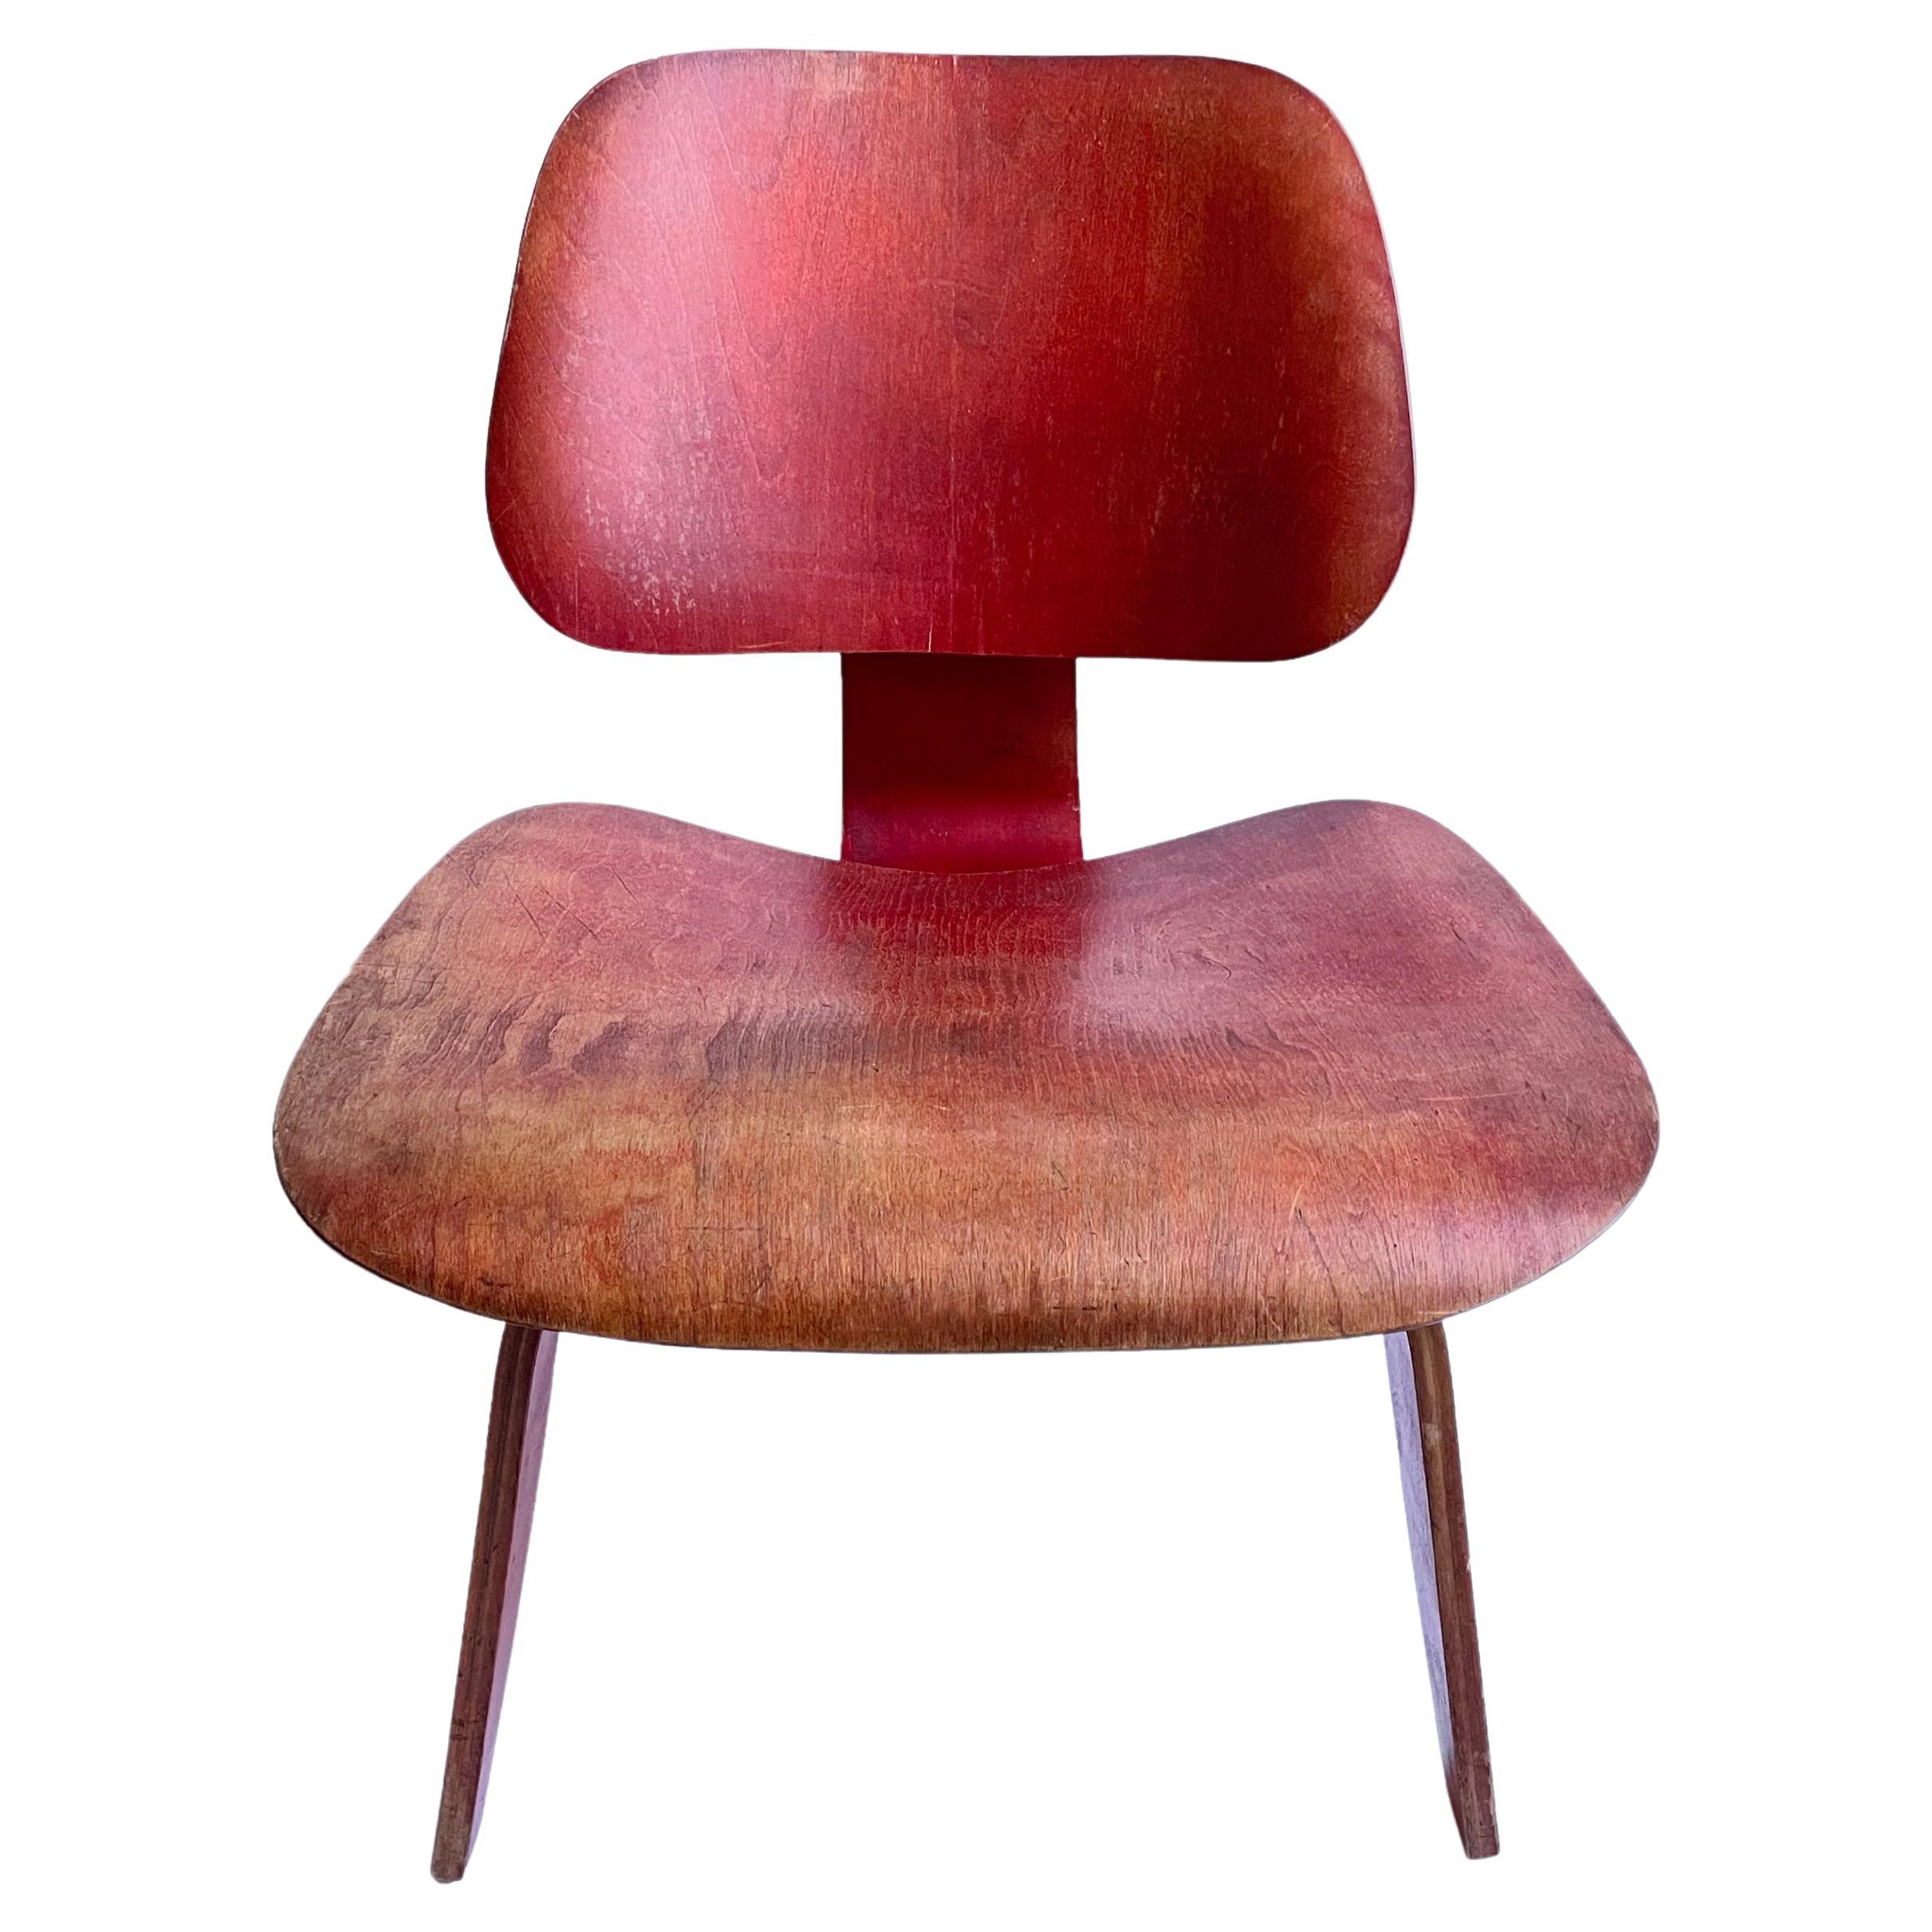 Herman Miller Eames LCW Roter Anilinfarbstoff